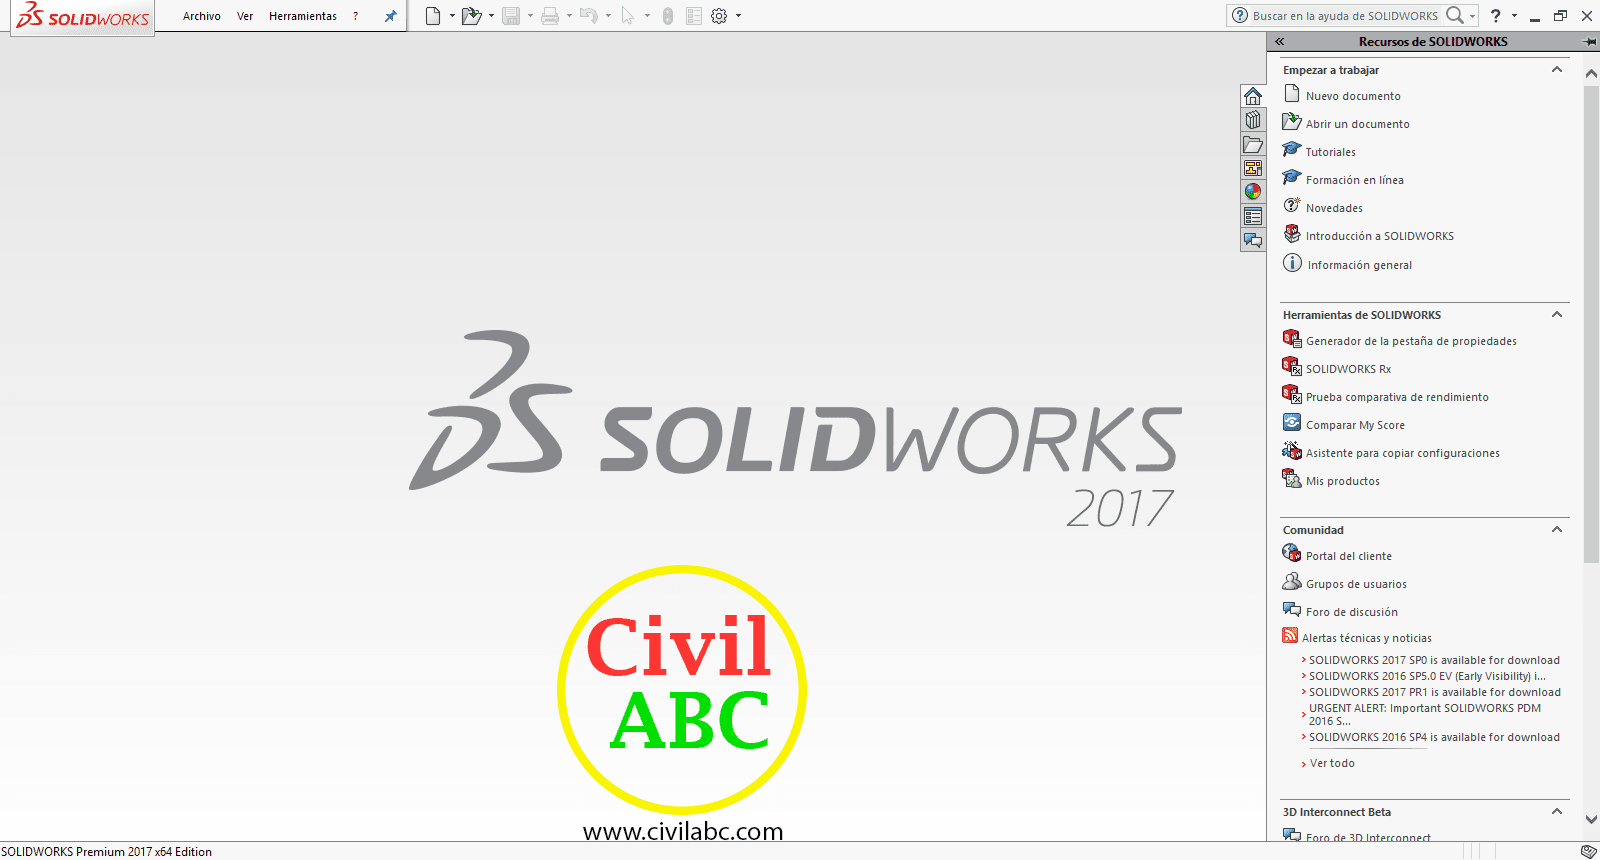 solidworks 2015 free download full version with crack 64 bit